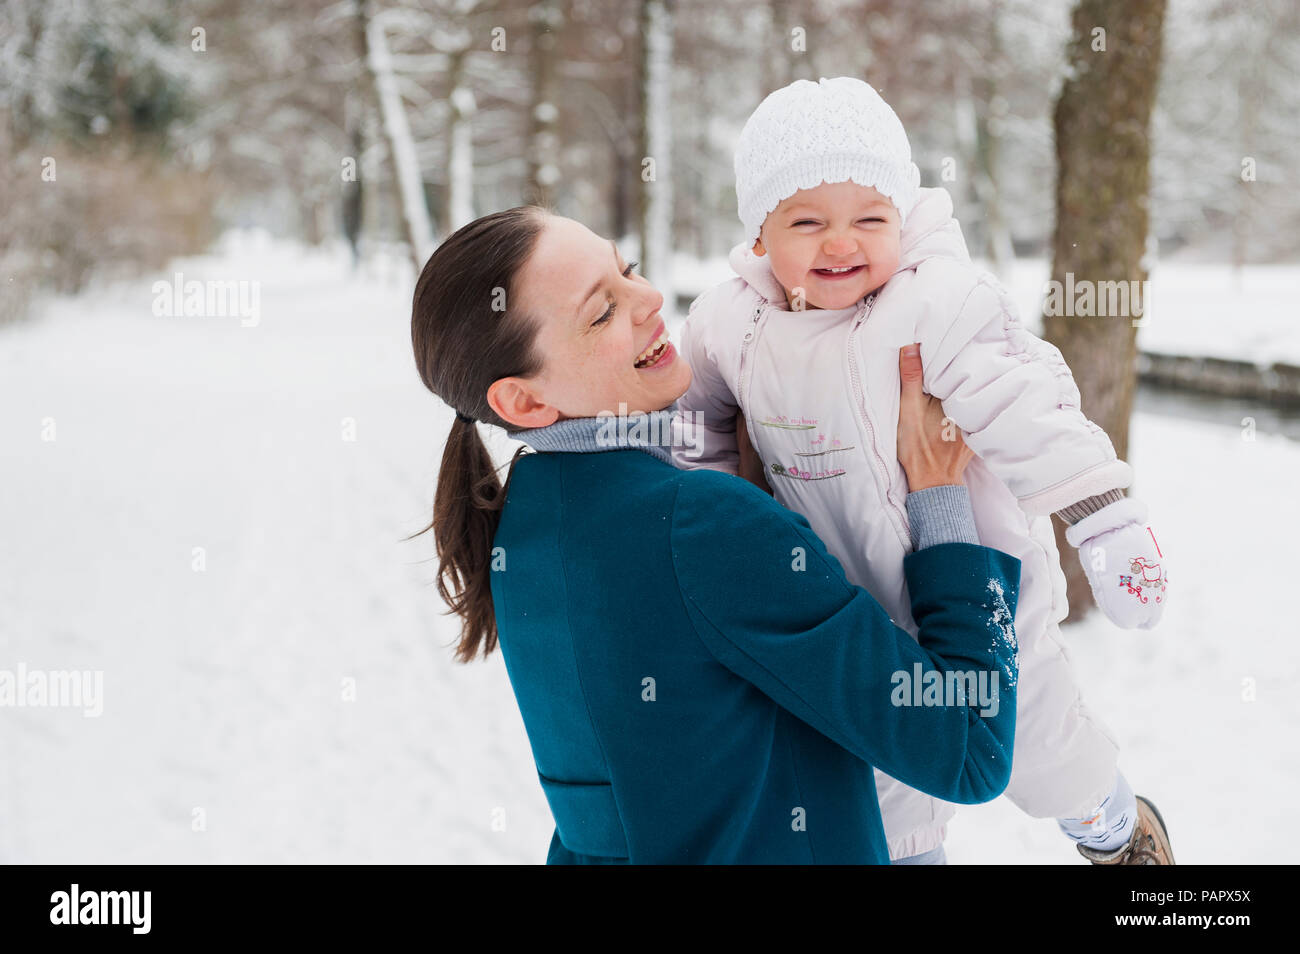 Portrait of happy baby girl having fun with her mother in snow-covered landscape Stock Photo